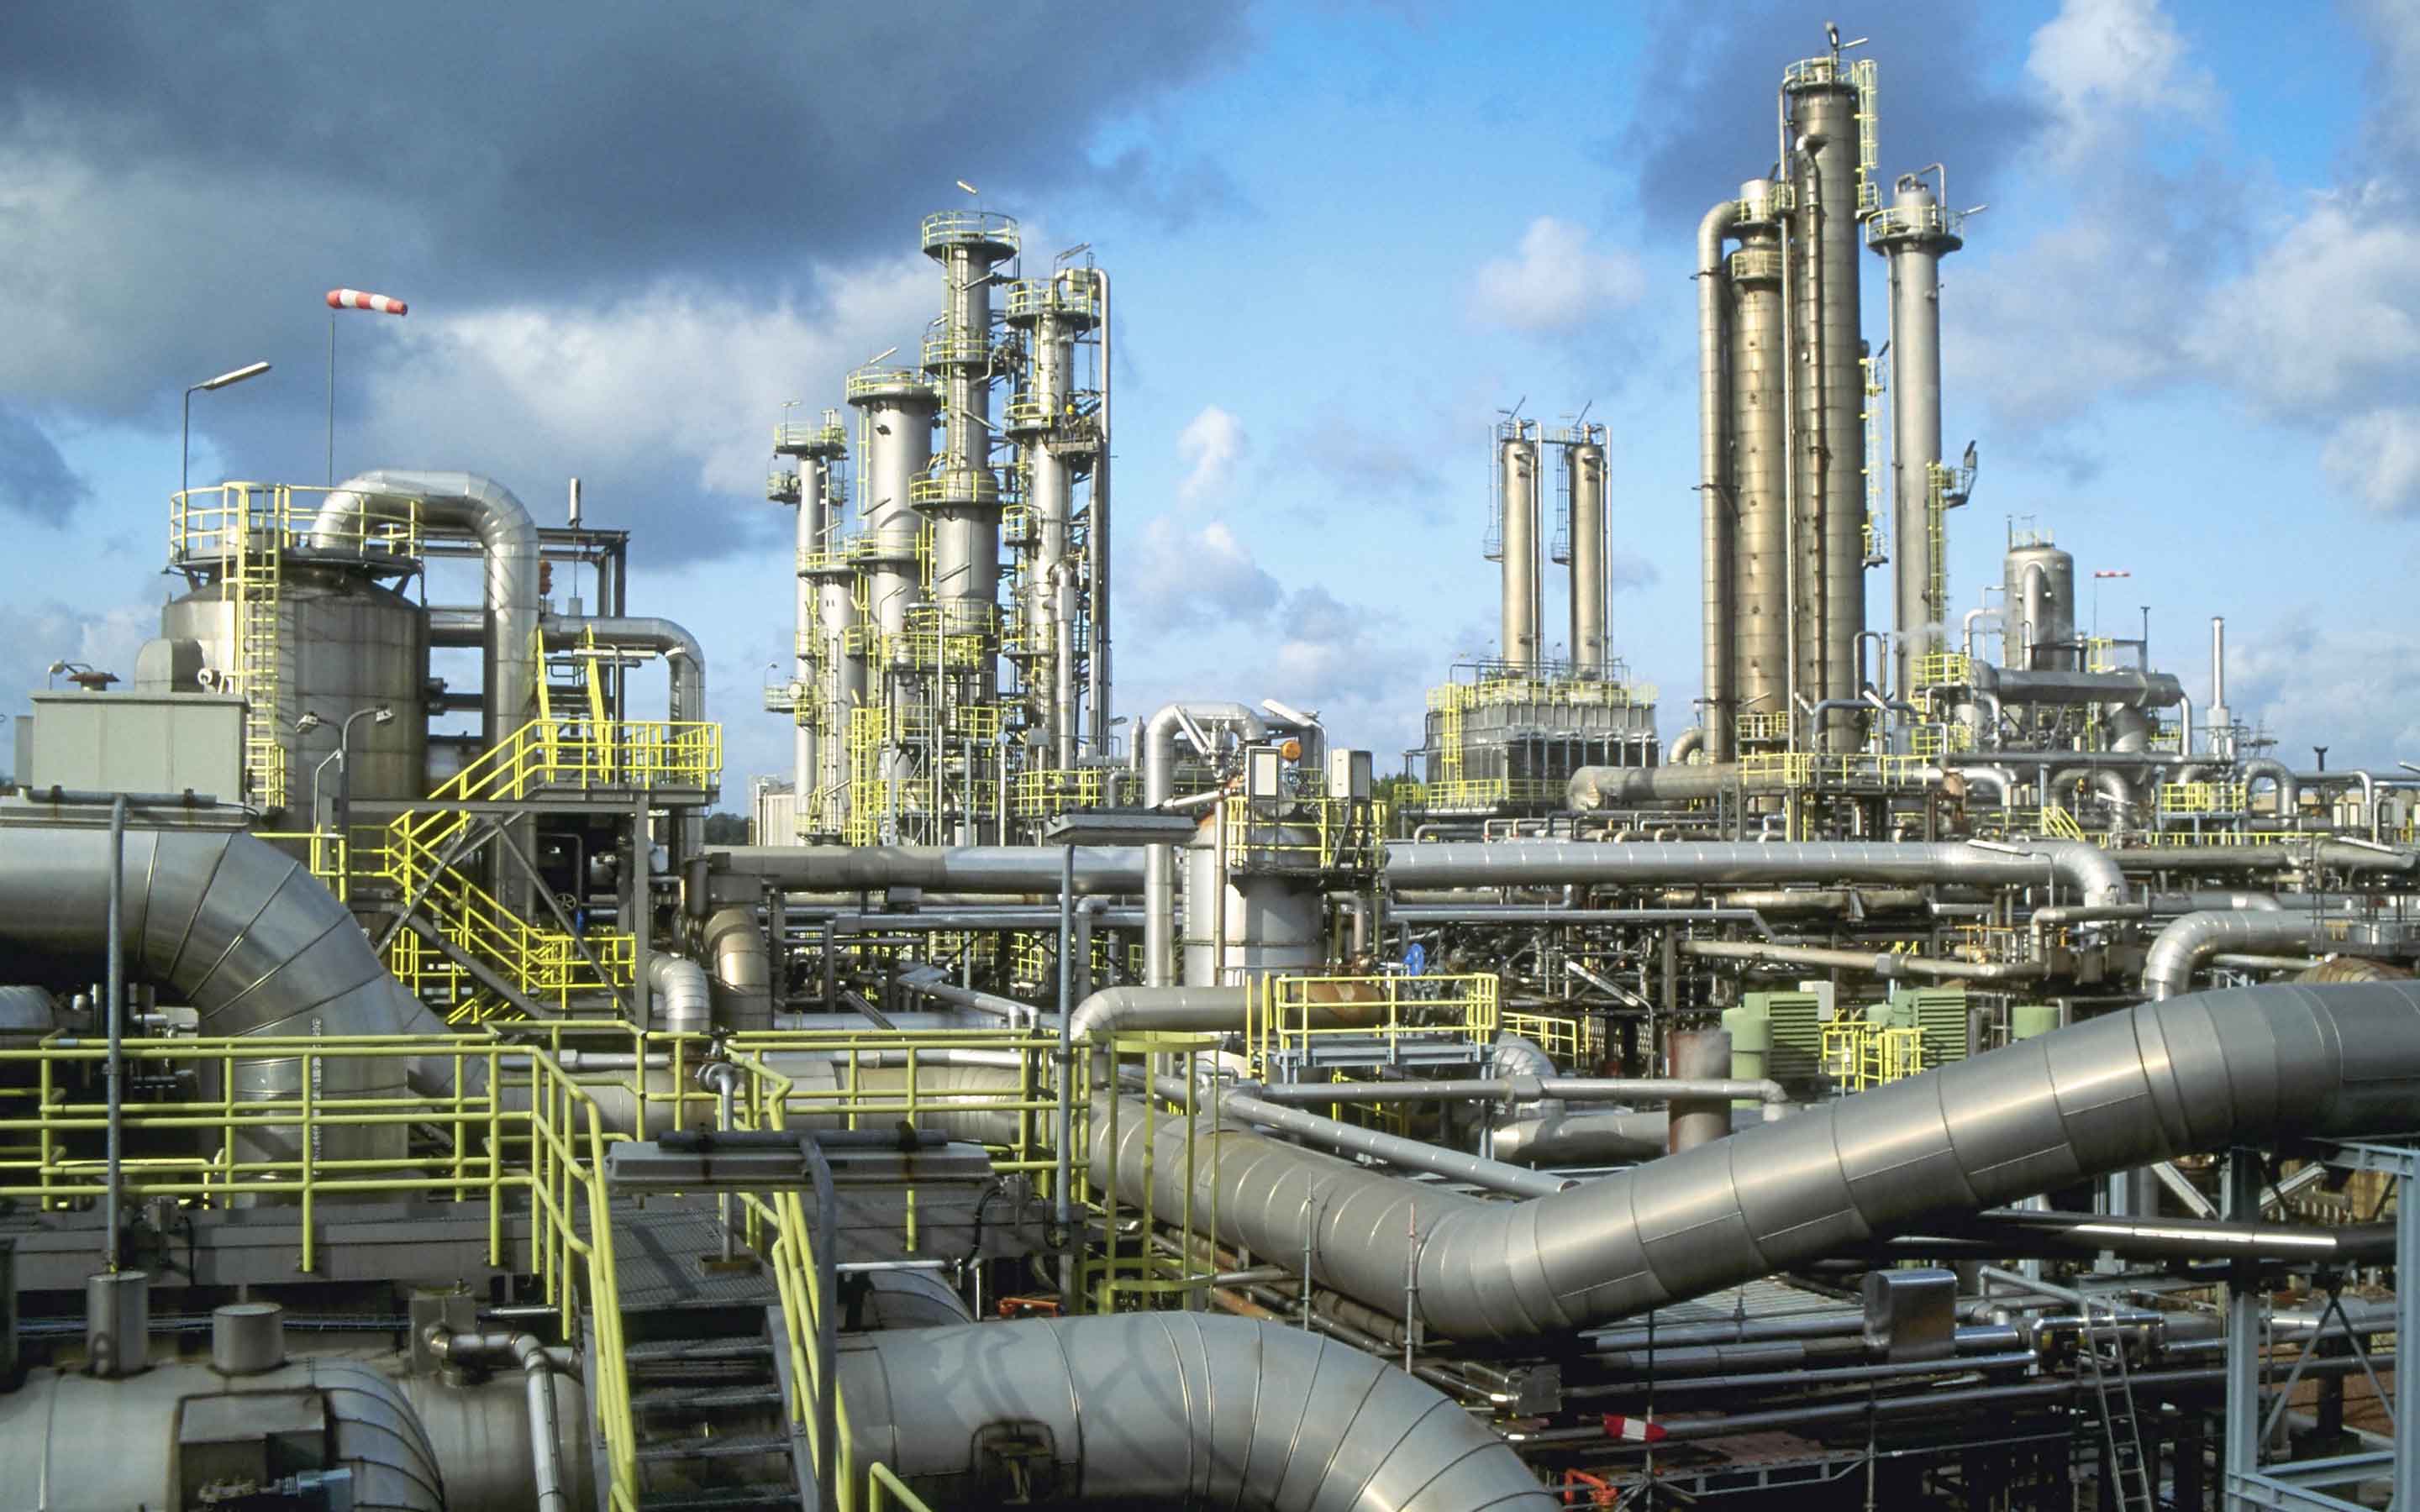 http://www.pcscsecurity.com/wp-content/uploads/2014/03/refinery_background.jpg